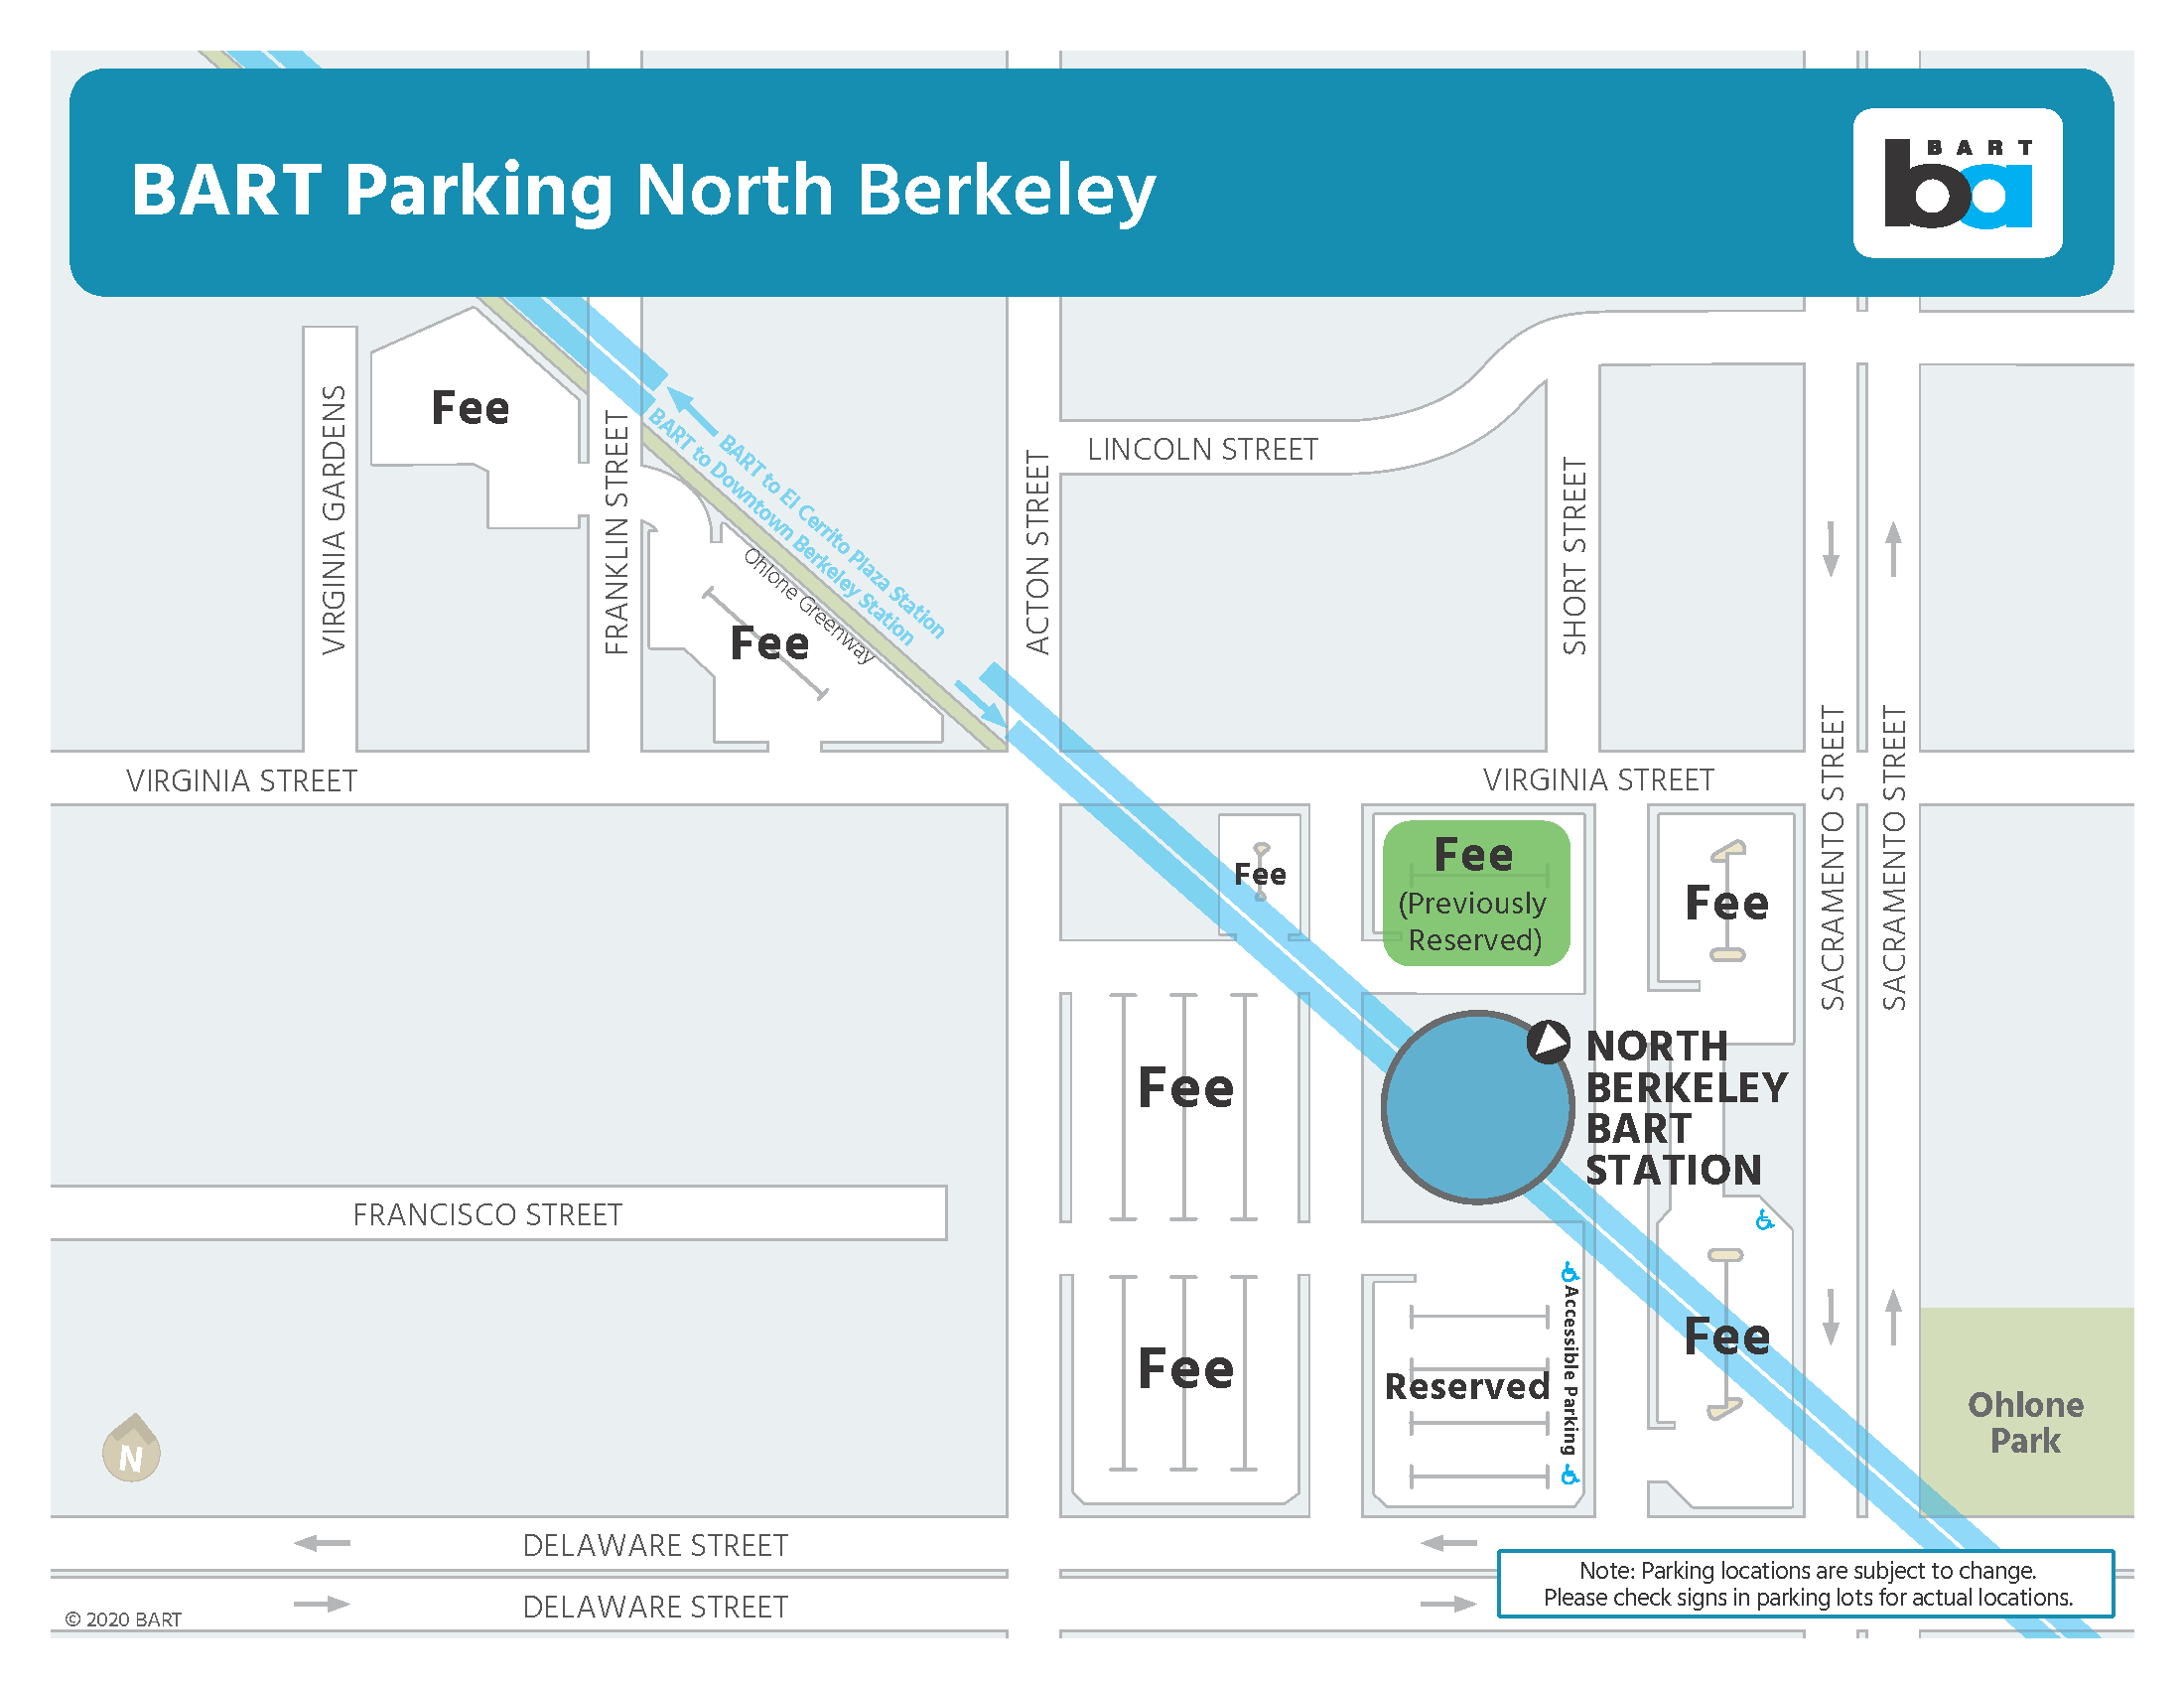 Parking areas at North Berkeley Station being reconfigured